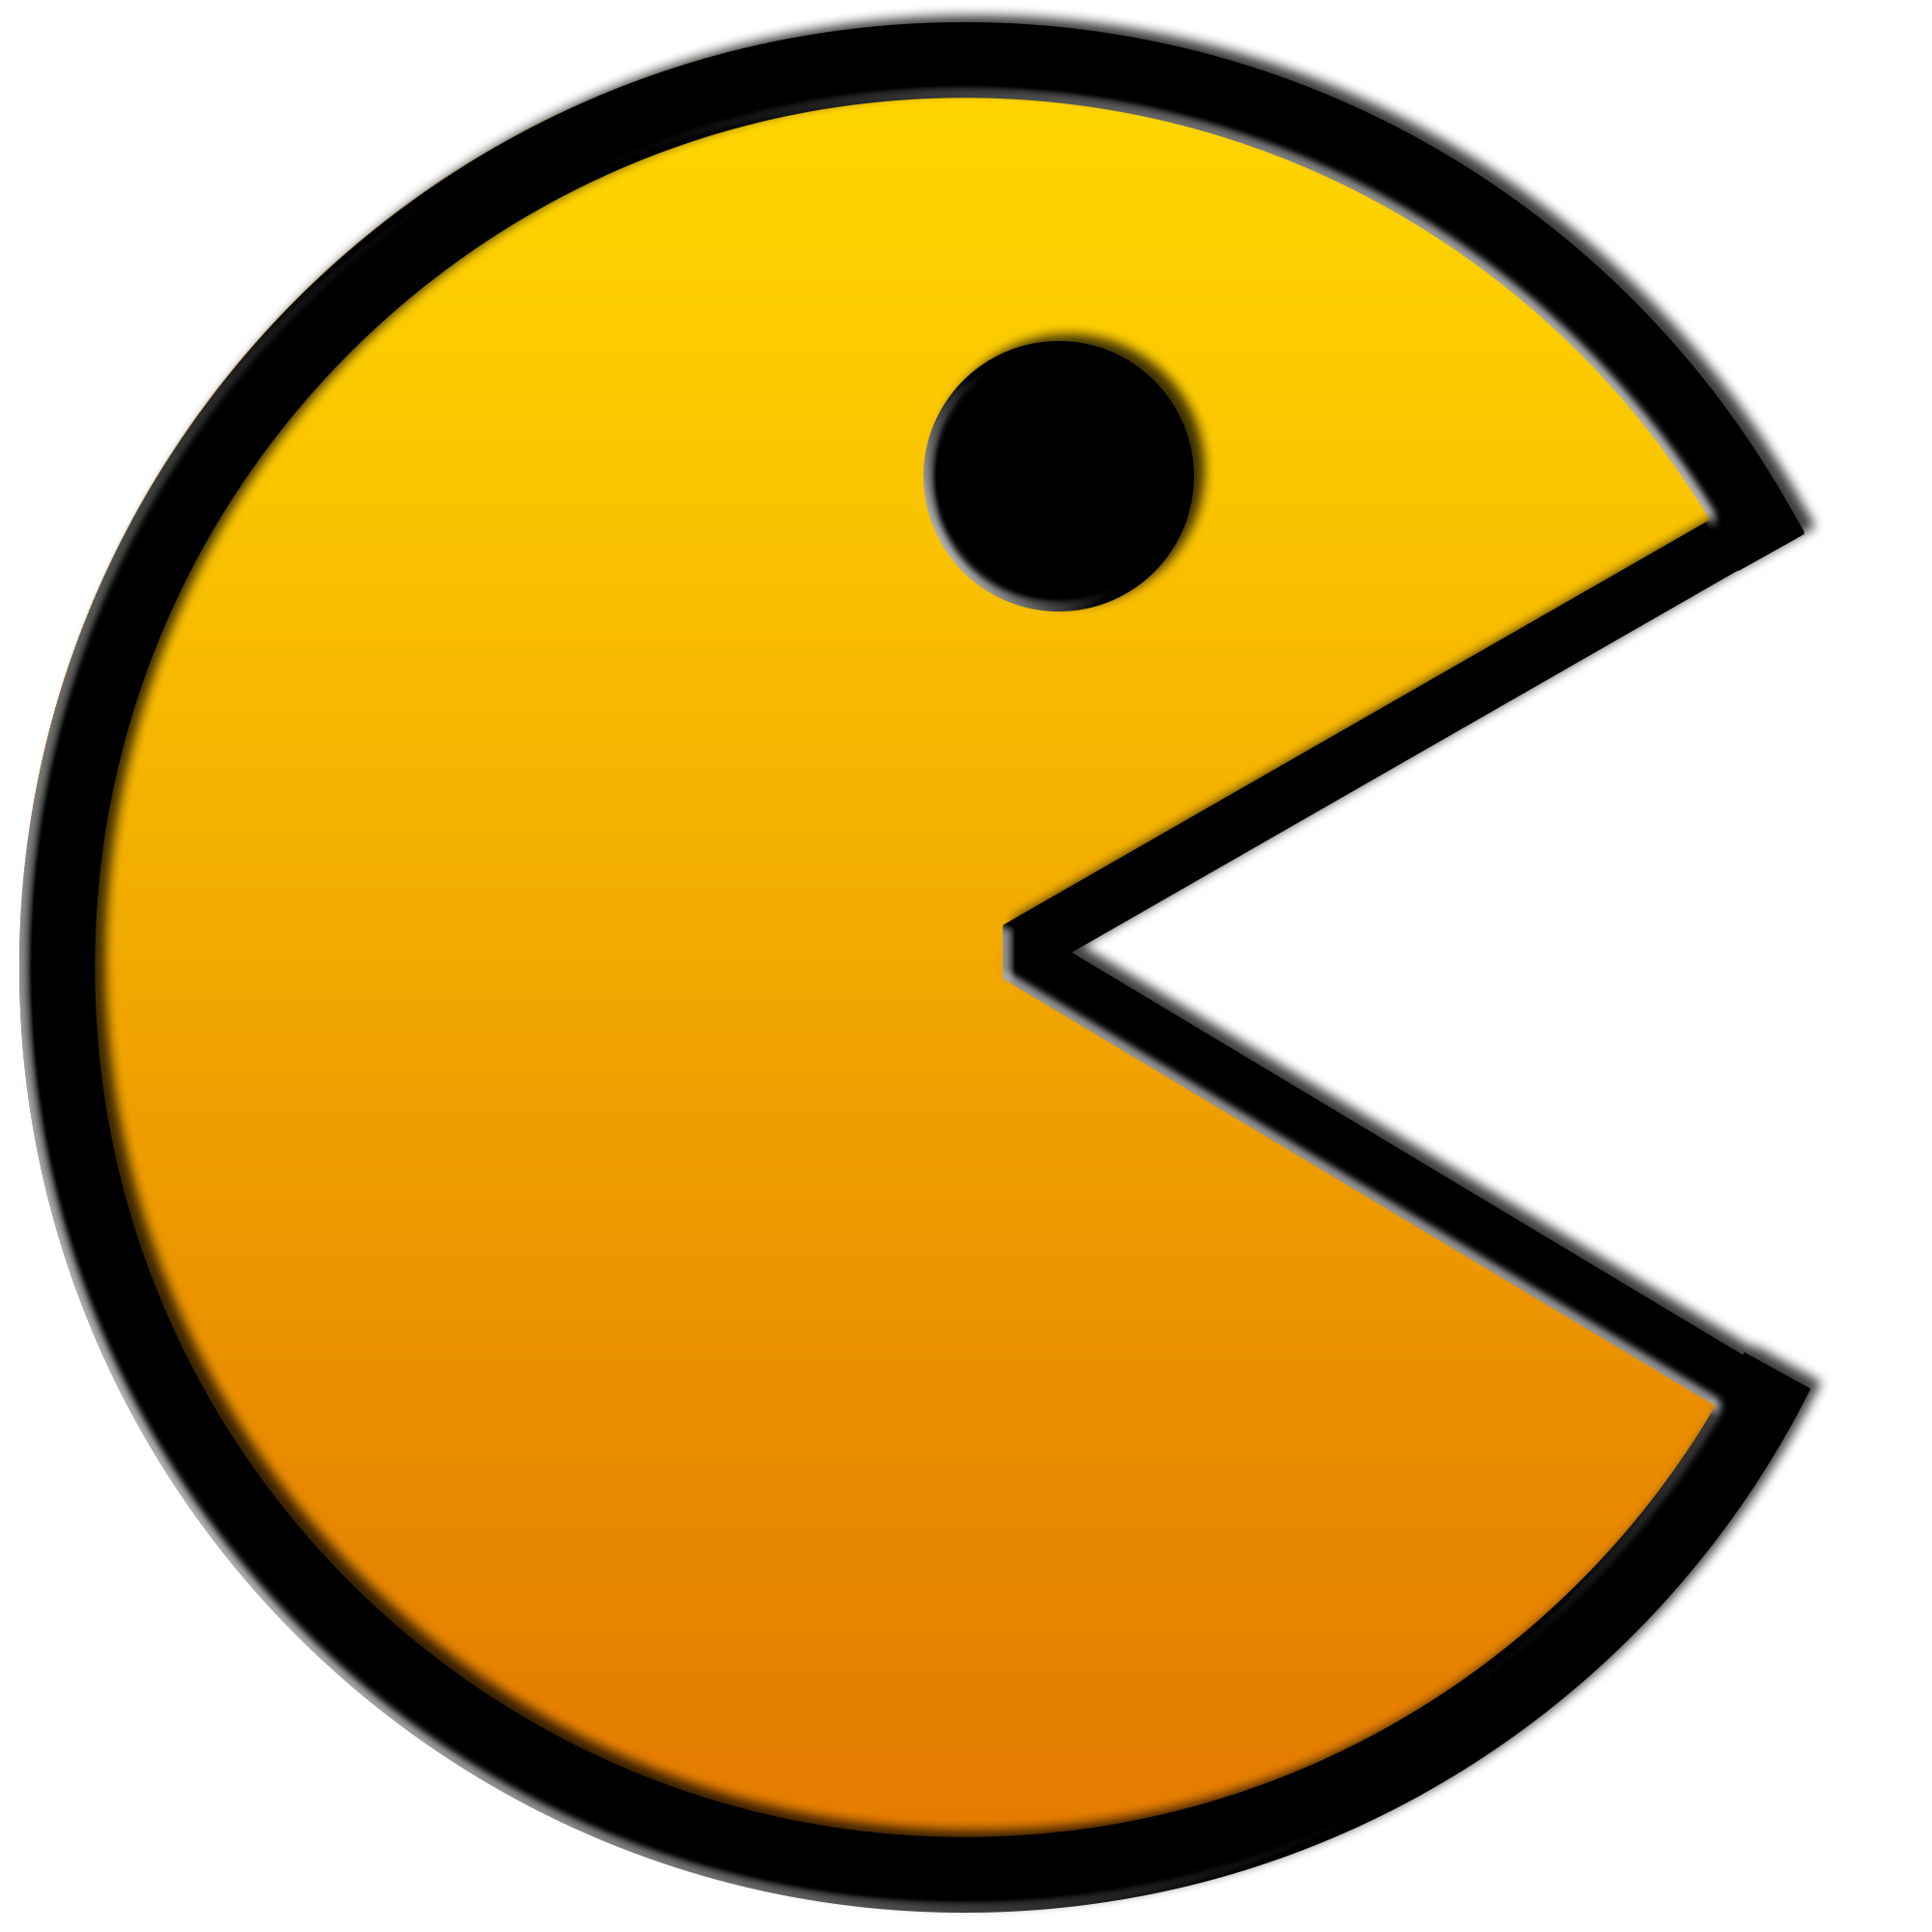 Pacman clipart video game. Hd png transparent images